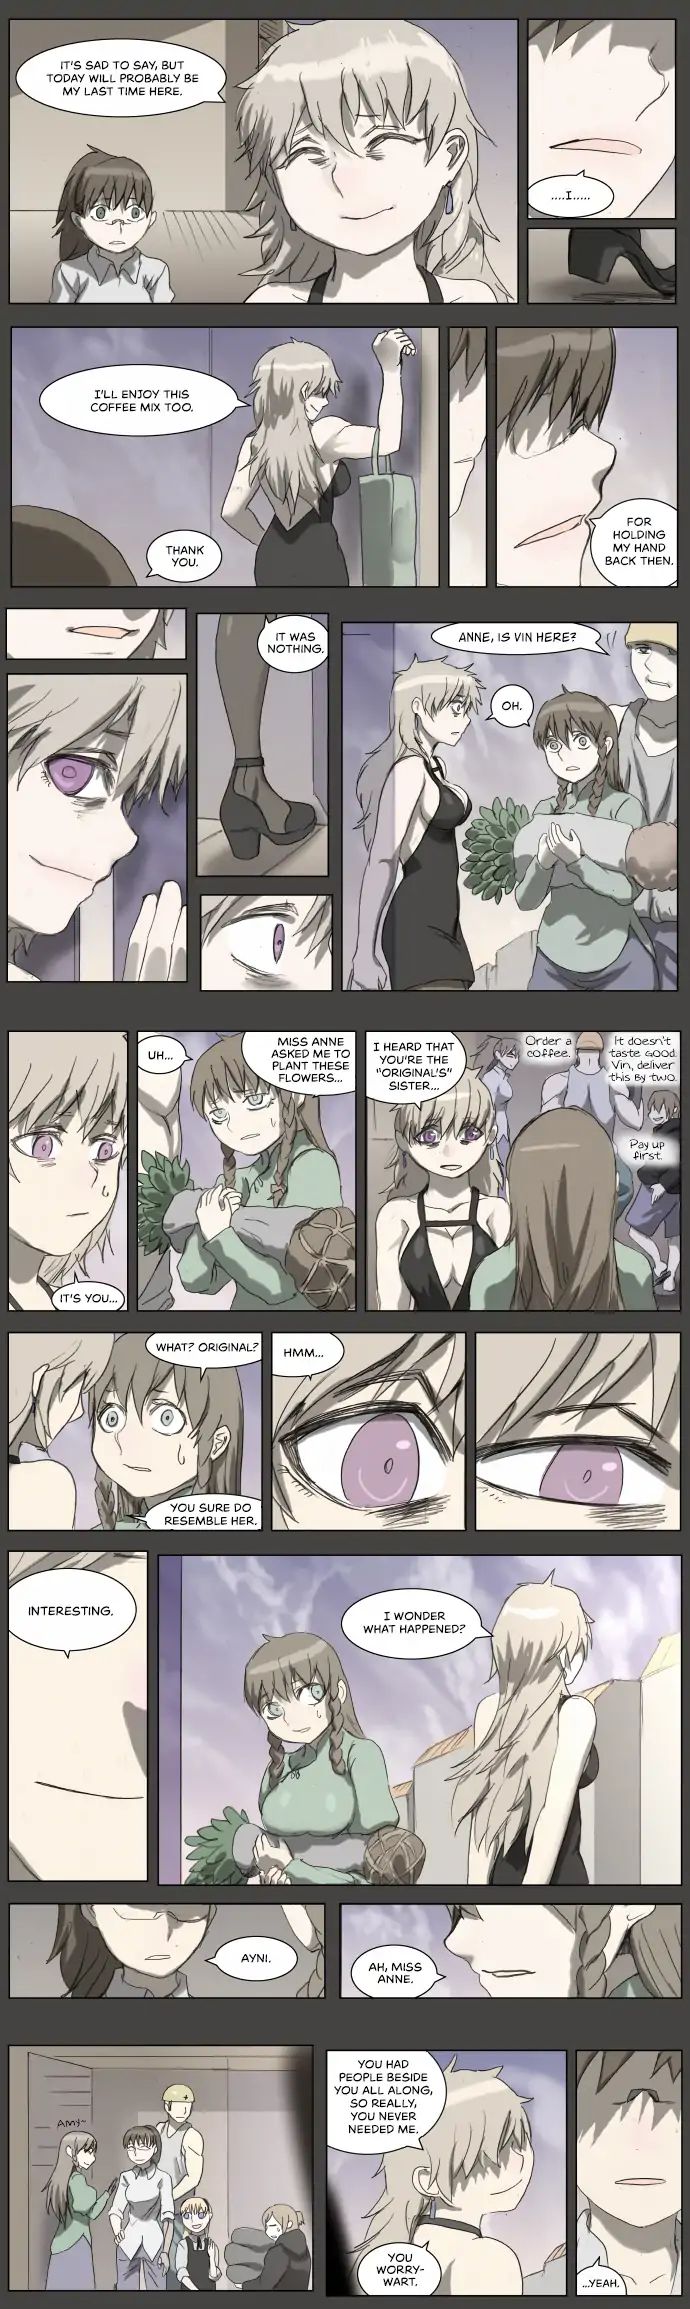 Knight Run Chapter 179 Page 2